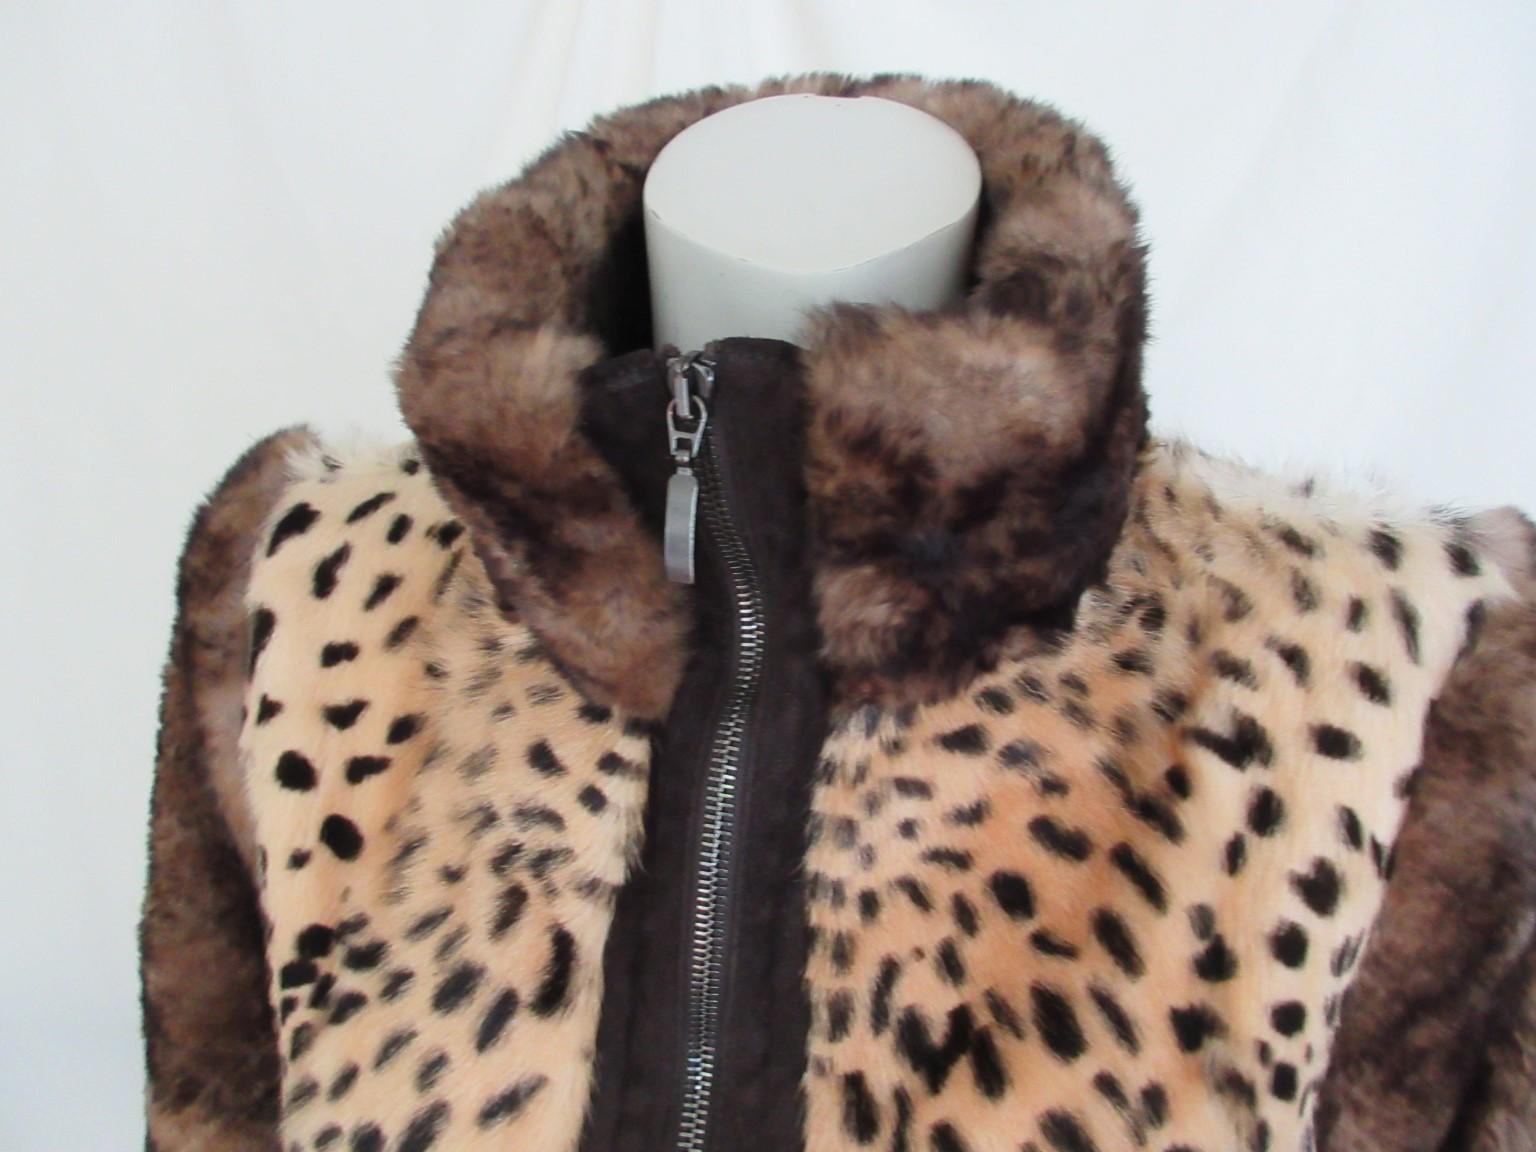 Exclusive leopard coat designed with chinchilla fur

We offer more exclusive fur items, view our front store

Details:
One of a kind
2 pockets, zipper closing,  fully lined
Soft fur and light weight
no label
Size is aprox. small/medium please check